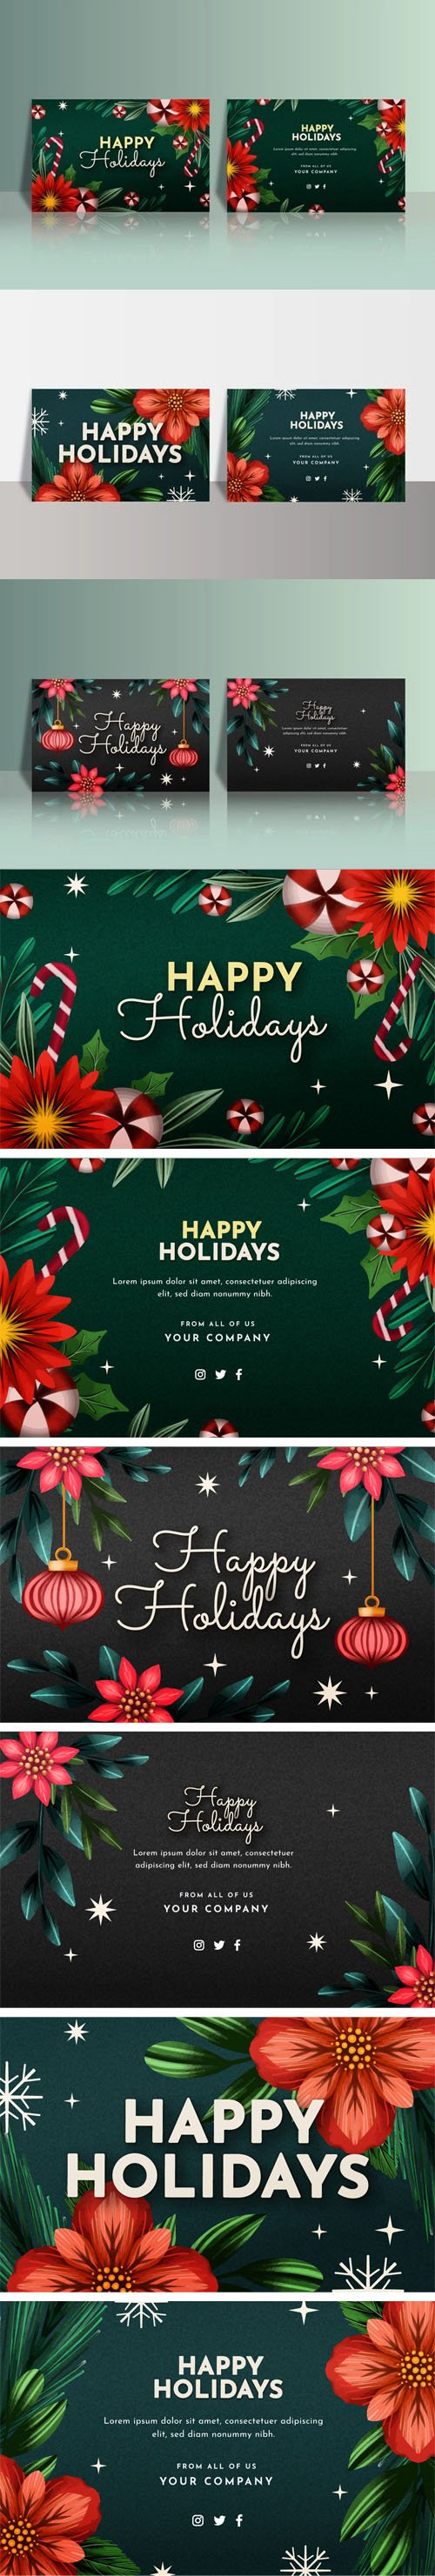 Happy Holidays Business Card Vector Templates